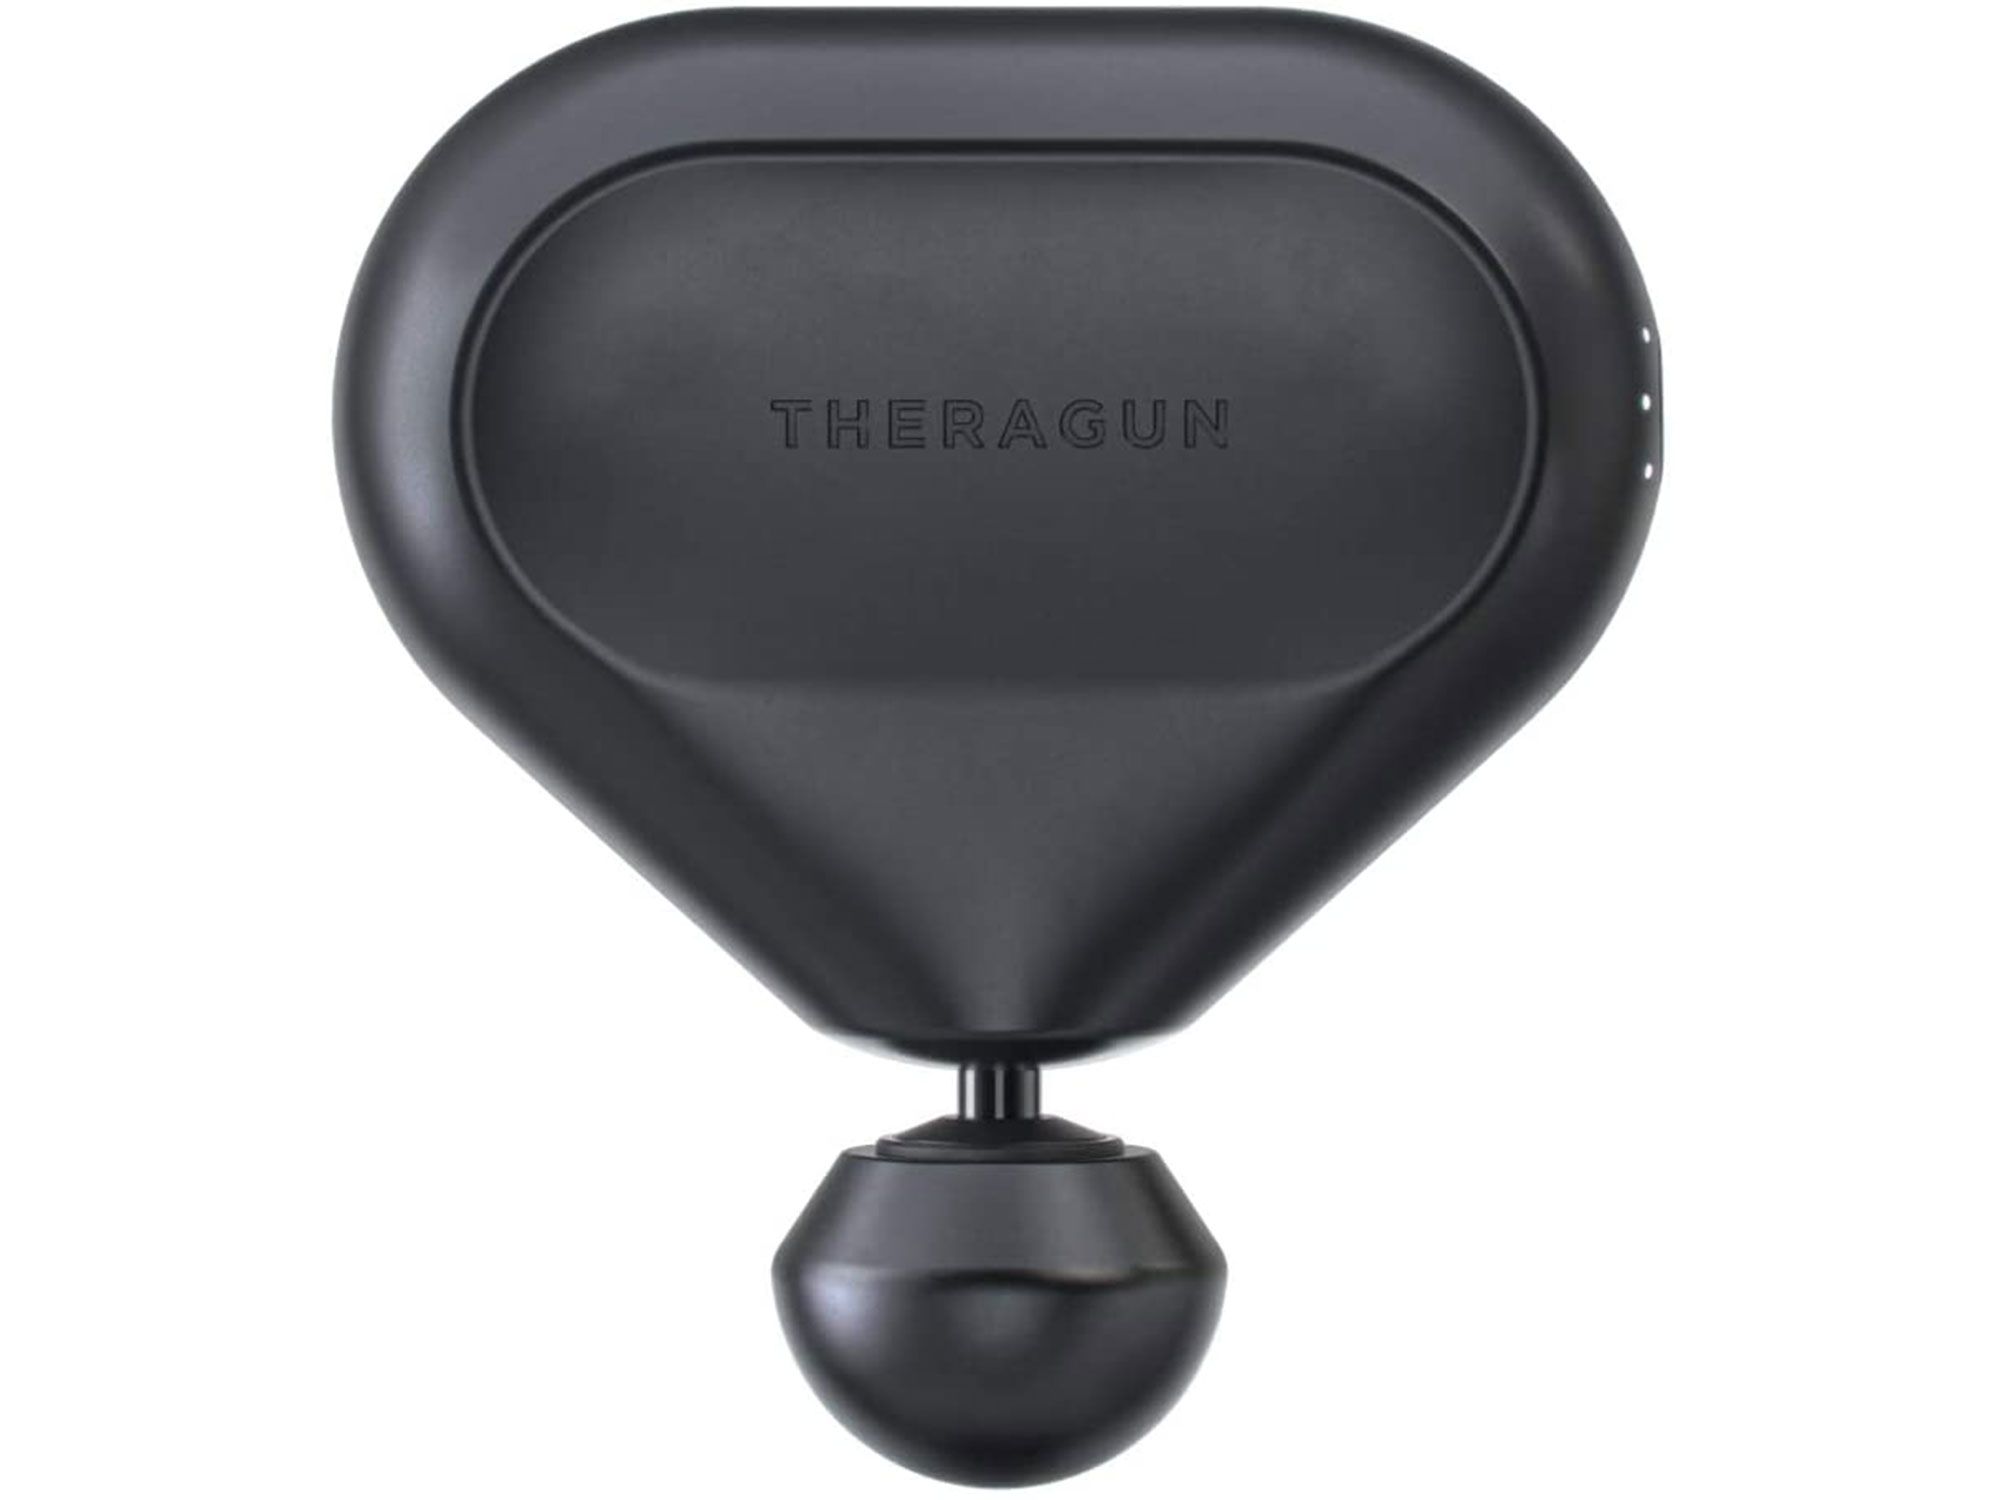 The compact Theragun Mini stores easily and provides well-deserved relief after a long day in the saddle.